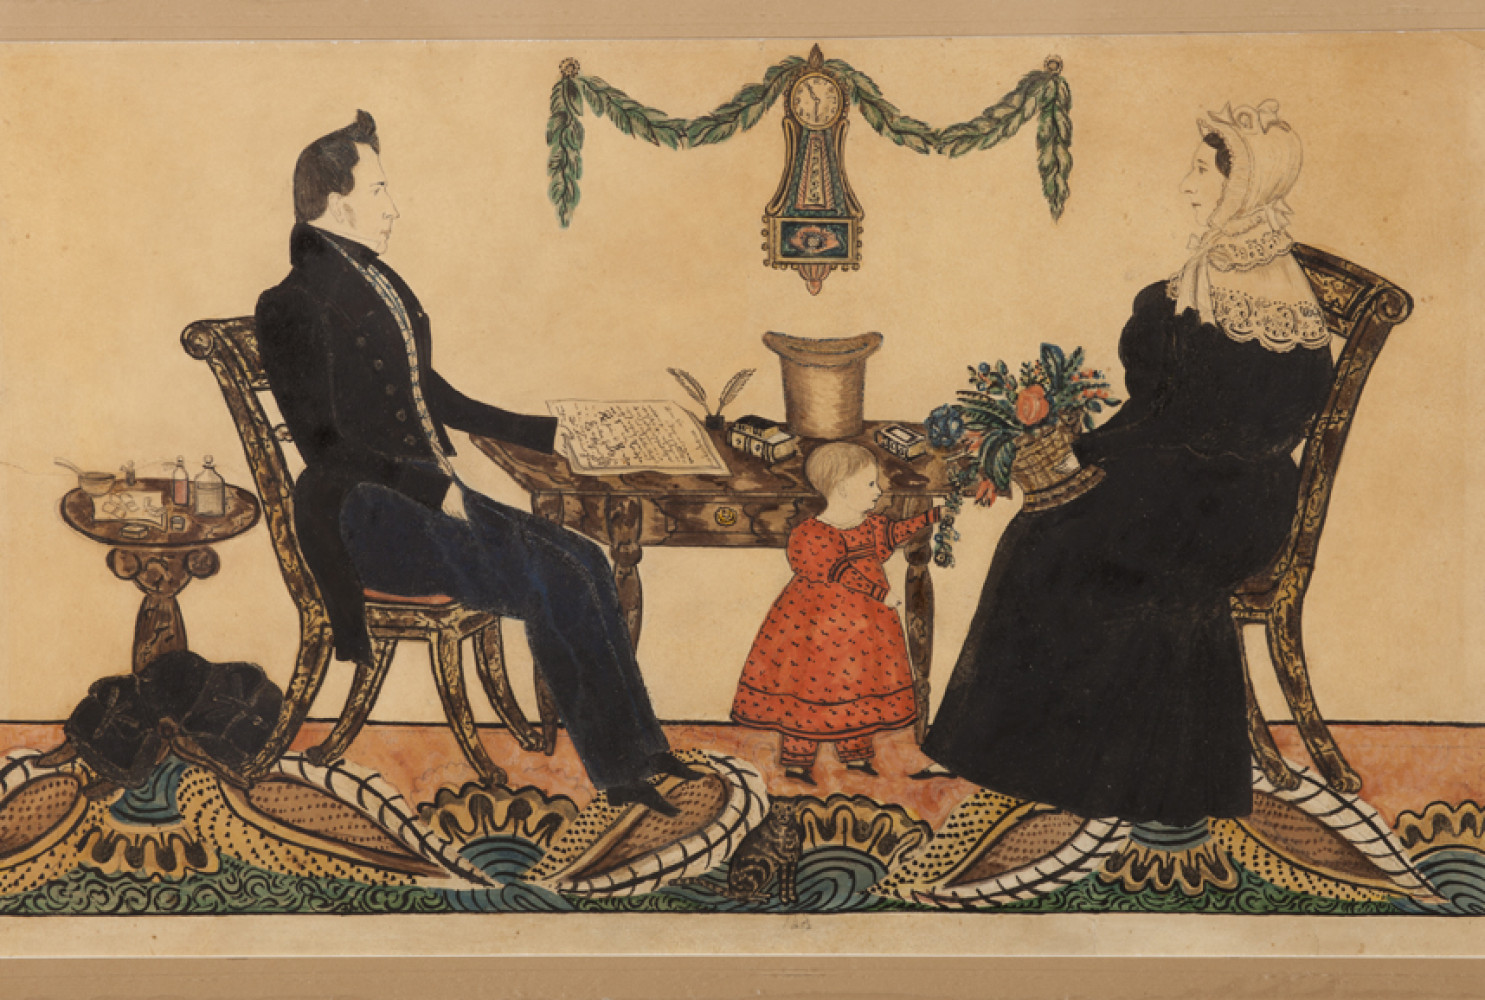 Dr. Nathaniel Grant Family, 1835—1836, Attributed to Joseph H. Davis (American, 1811—1865), Watercolor and graphite on wove paper, Courtesy of the Barbara L. Gordon Collection
